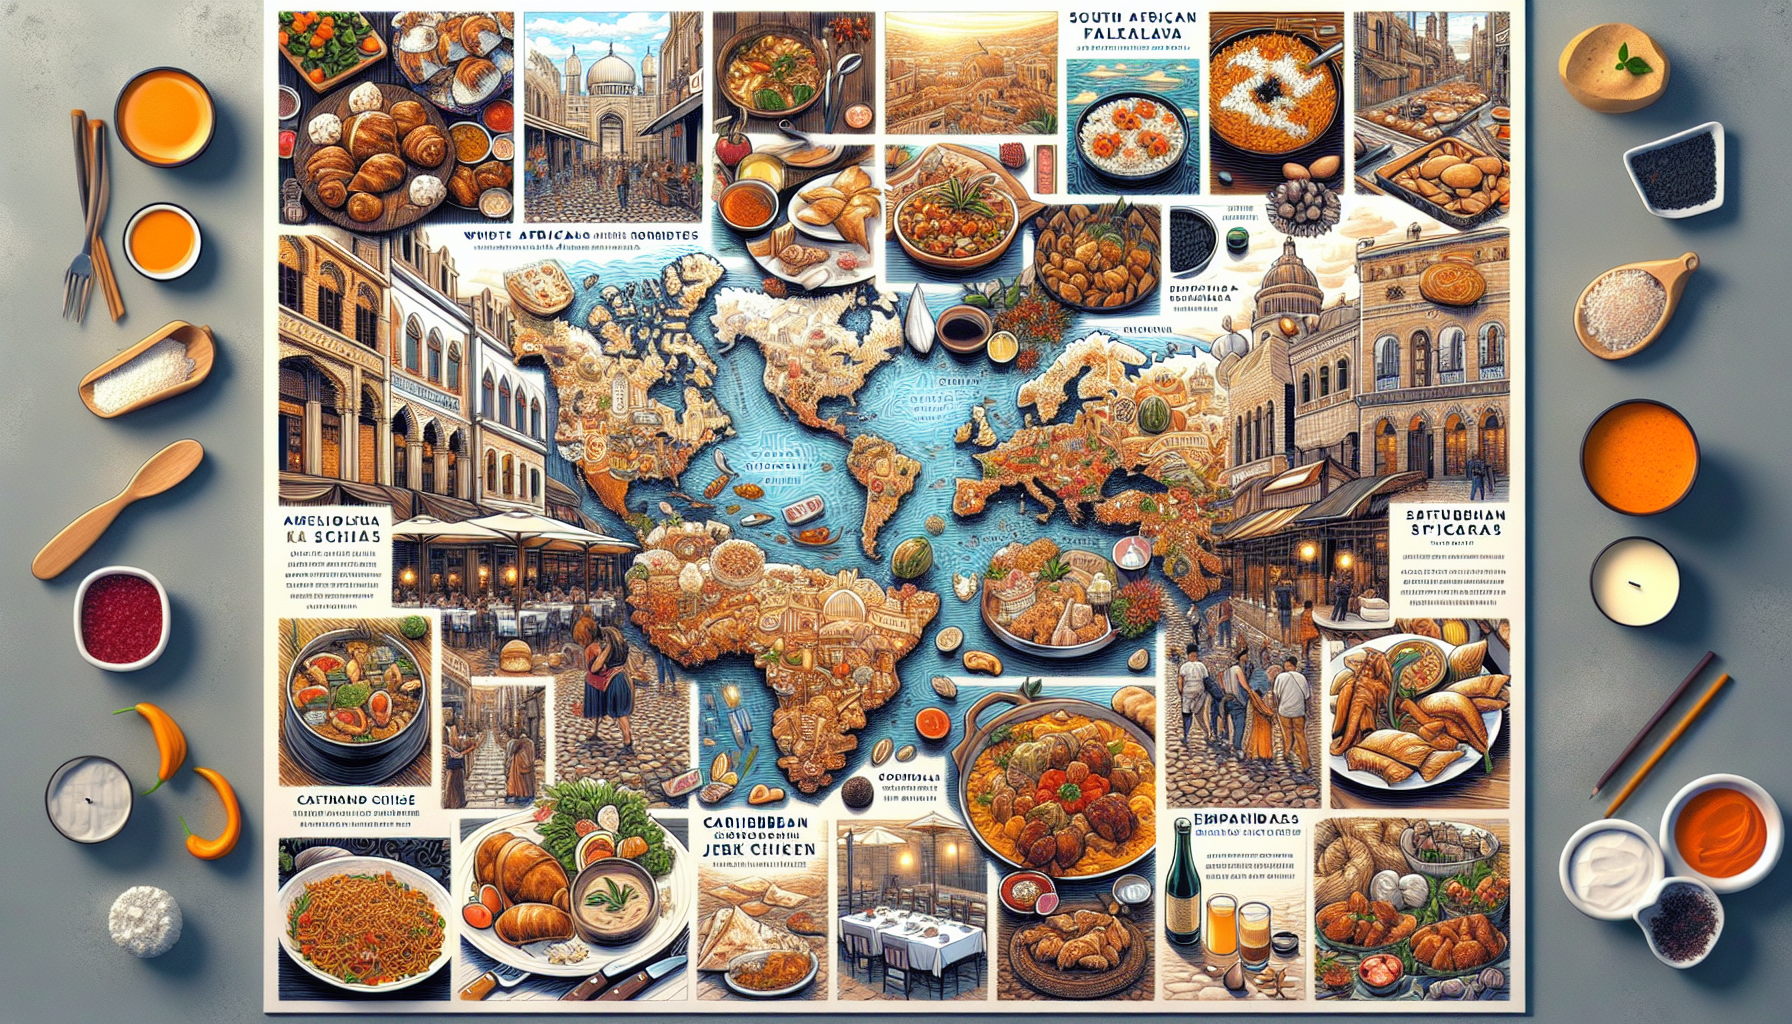 explore the world's unique culinary delights with our guide to extraordinary gastronomic experiences across the globe.